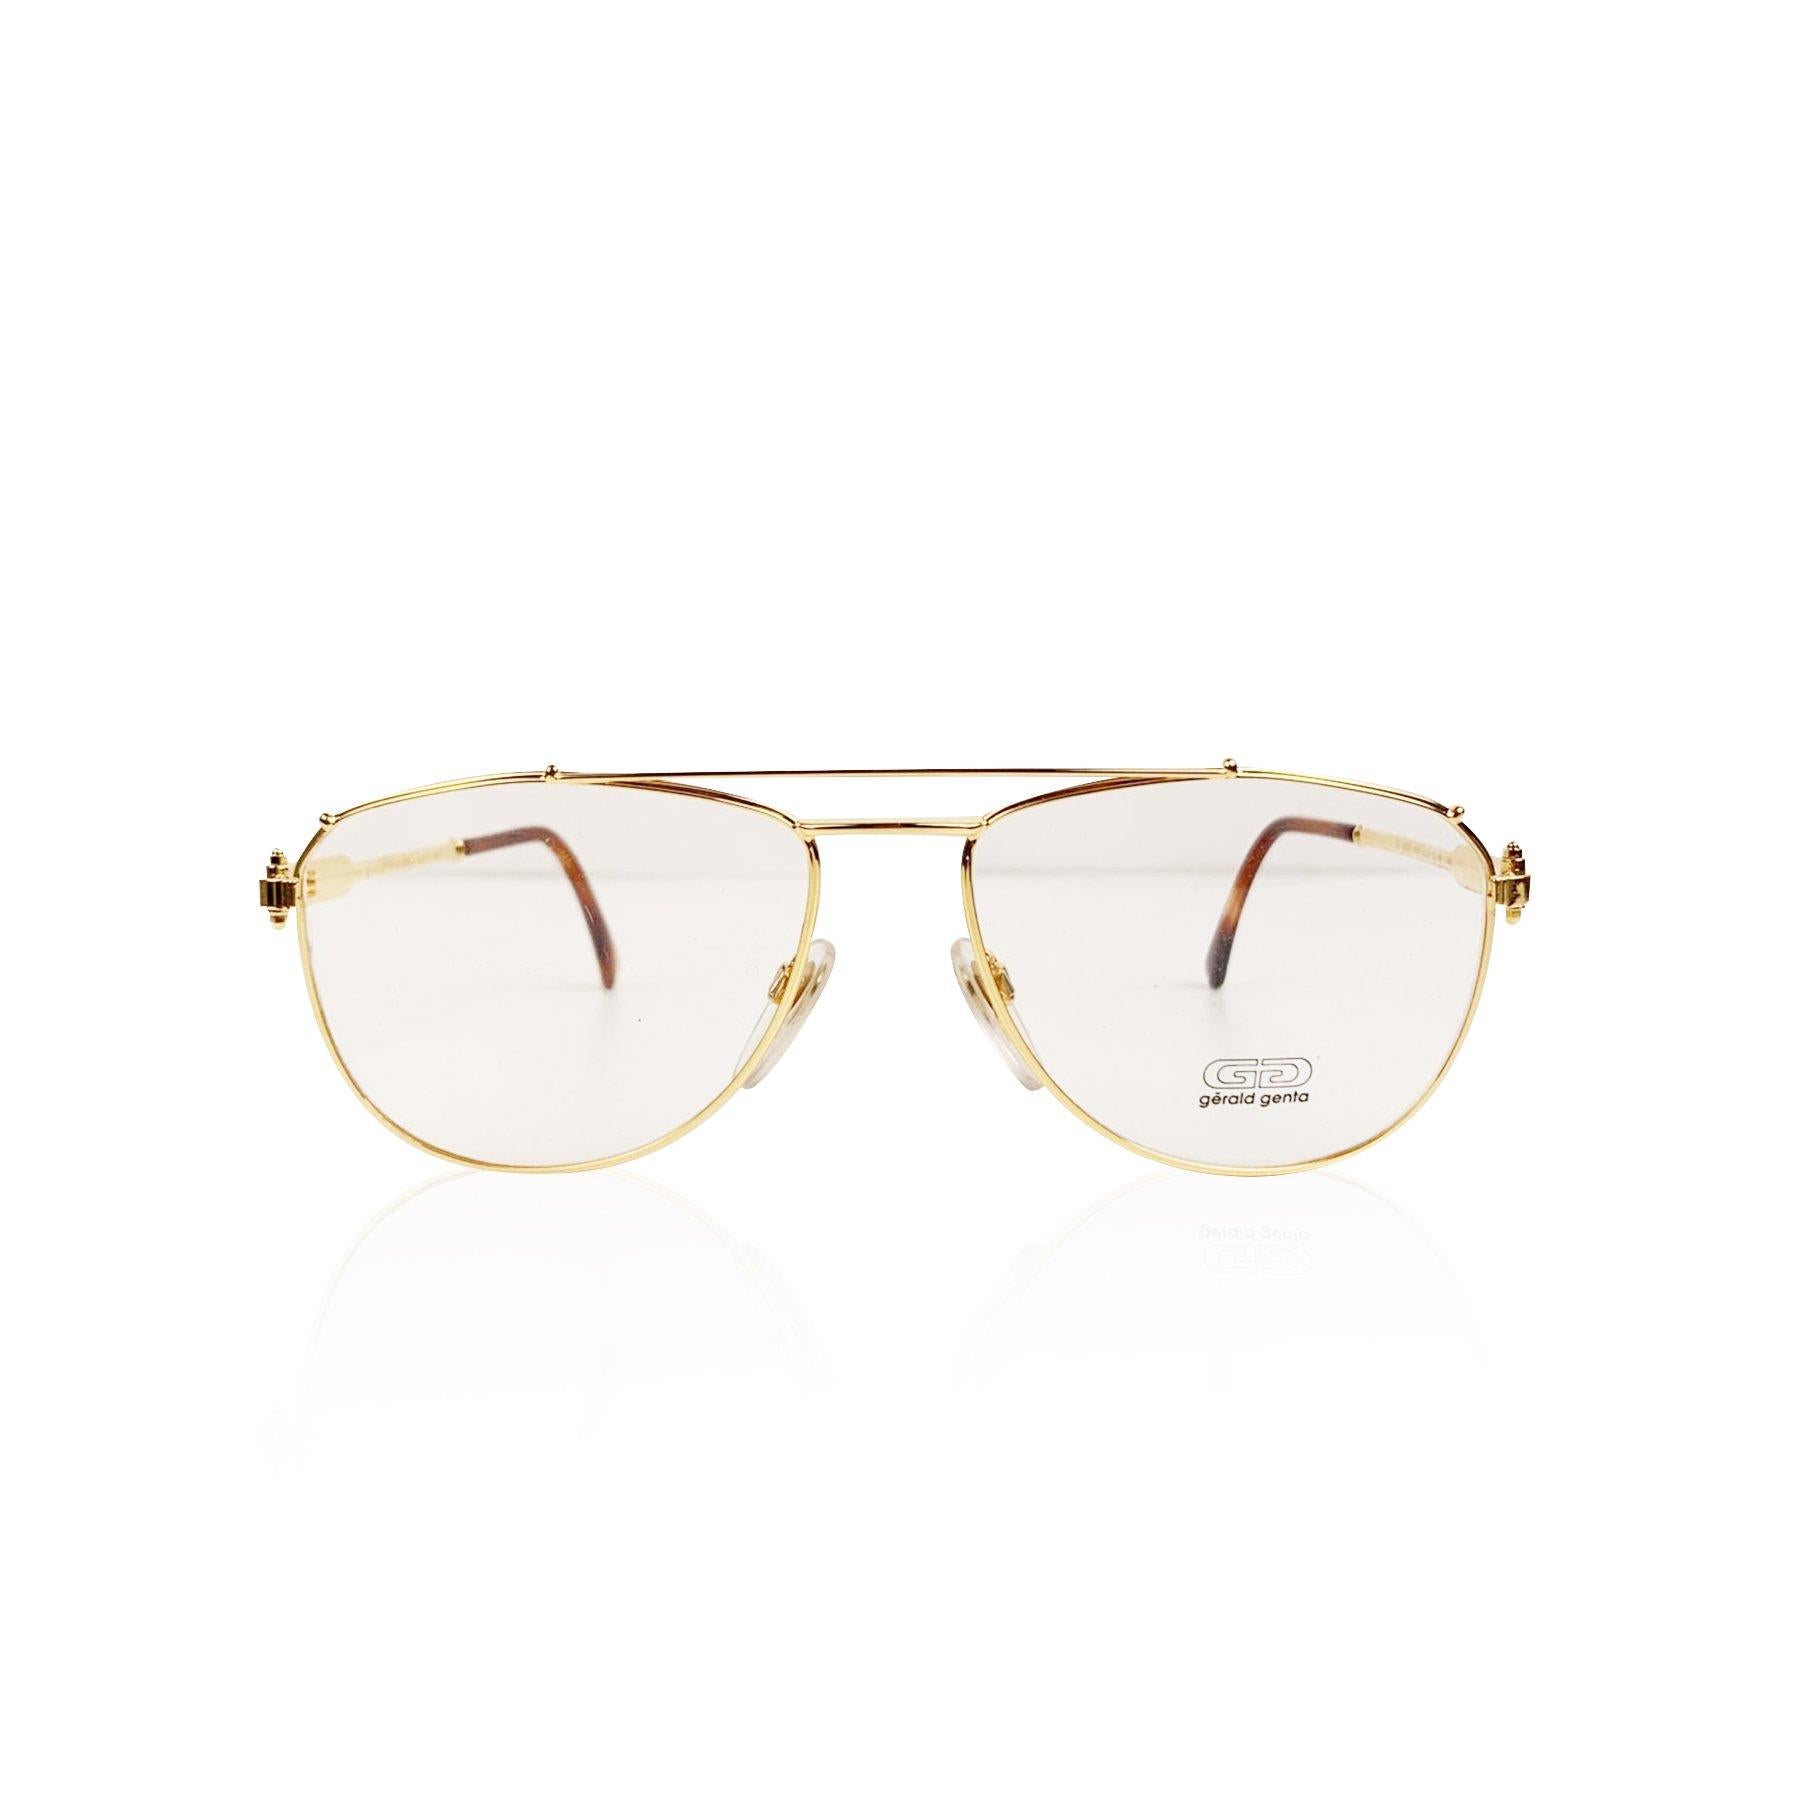 Gold plated aviator shaped large eyeglasses by Gerald Genta by Orama, from the early 1990s. Model: Gold and Gold 03 AU. Beautiful gold brushed frame. Hand Made in Italy. Details MATERIAL: Gold Plated COLOR: Gold MODEL: Gold and Gold 03 AU GENDER: